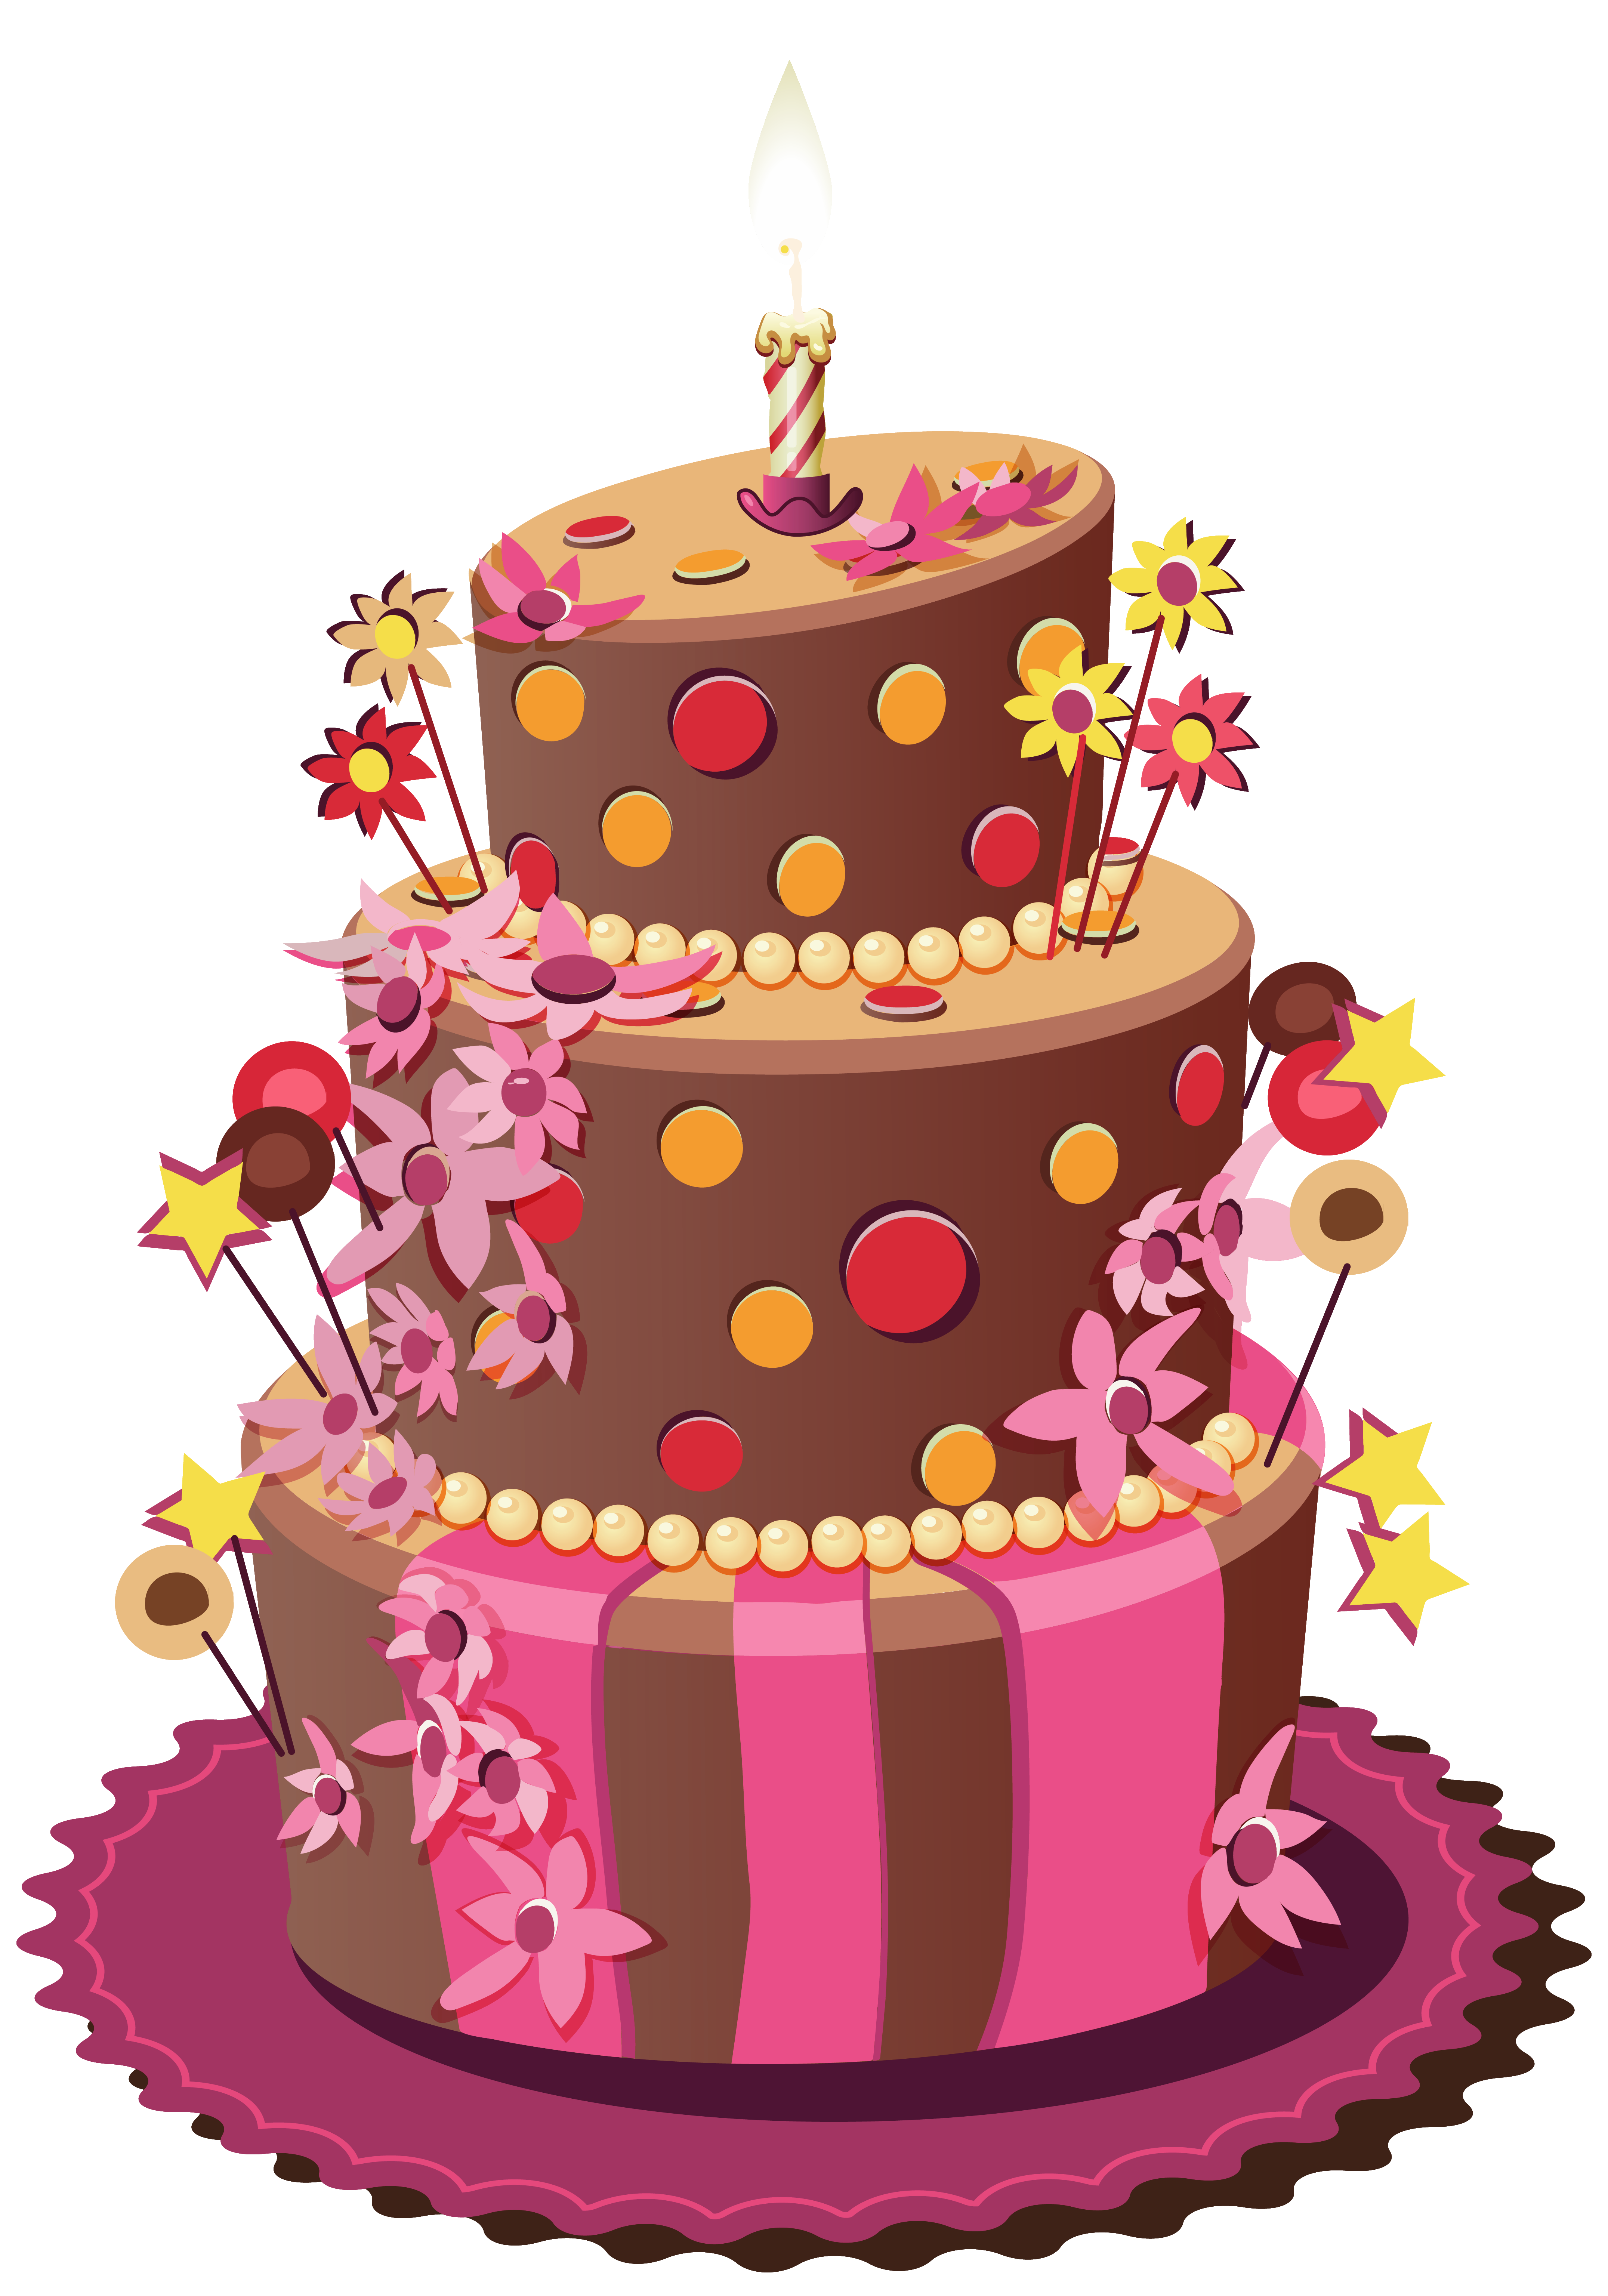 Birthday Cake PNG Clipart Image​ | Gallery Yopriceville - High-Quality Free  Images and Transparent PNG Clipart